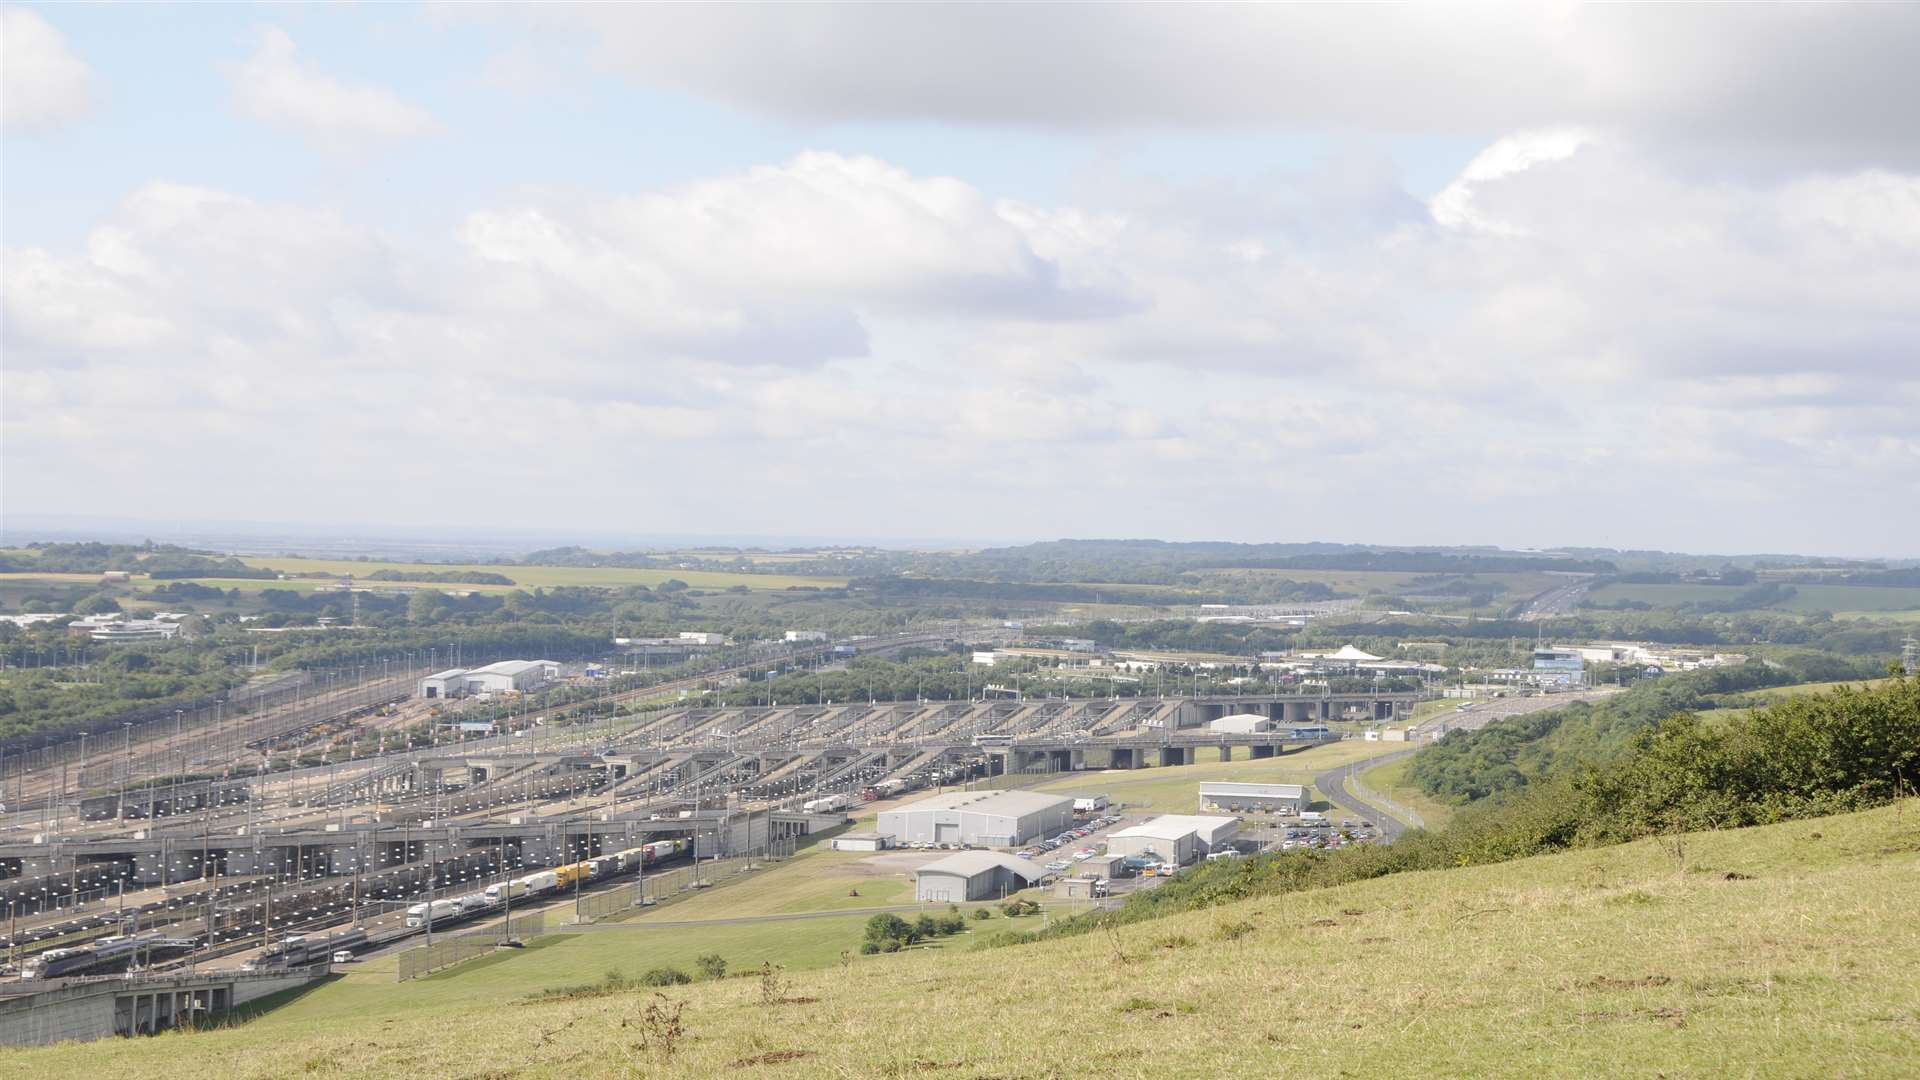 The monument is proposed to be built on land overlooking the Channel Tunnel